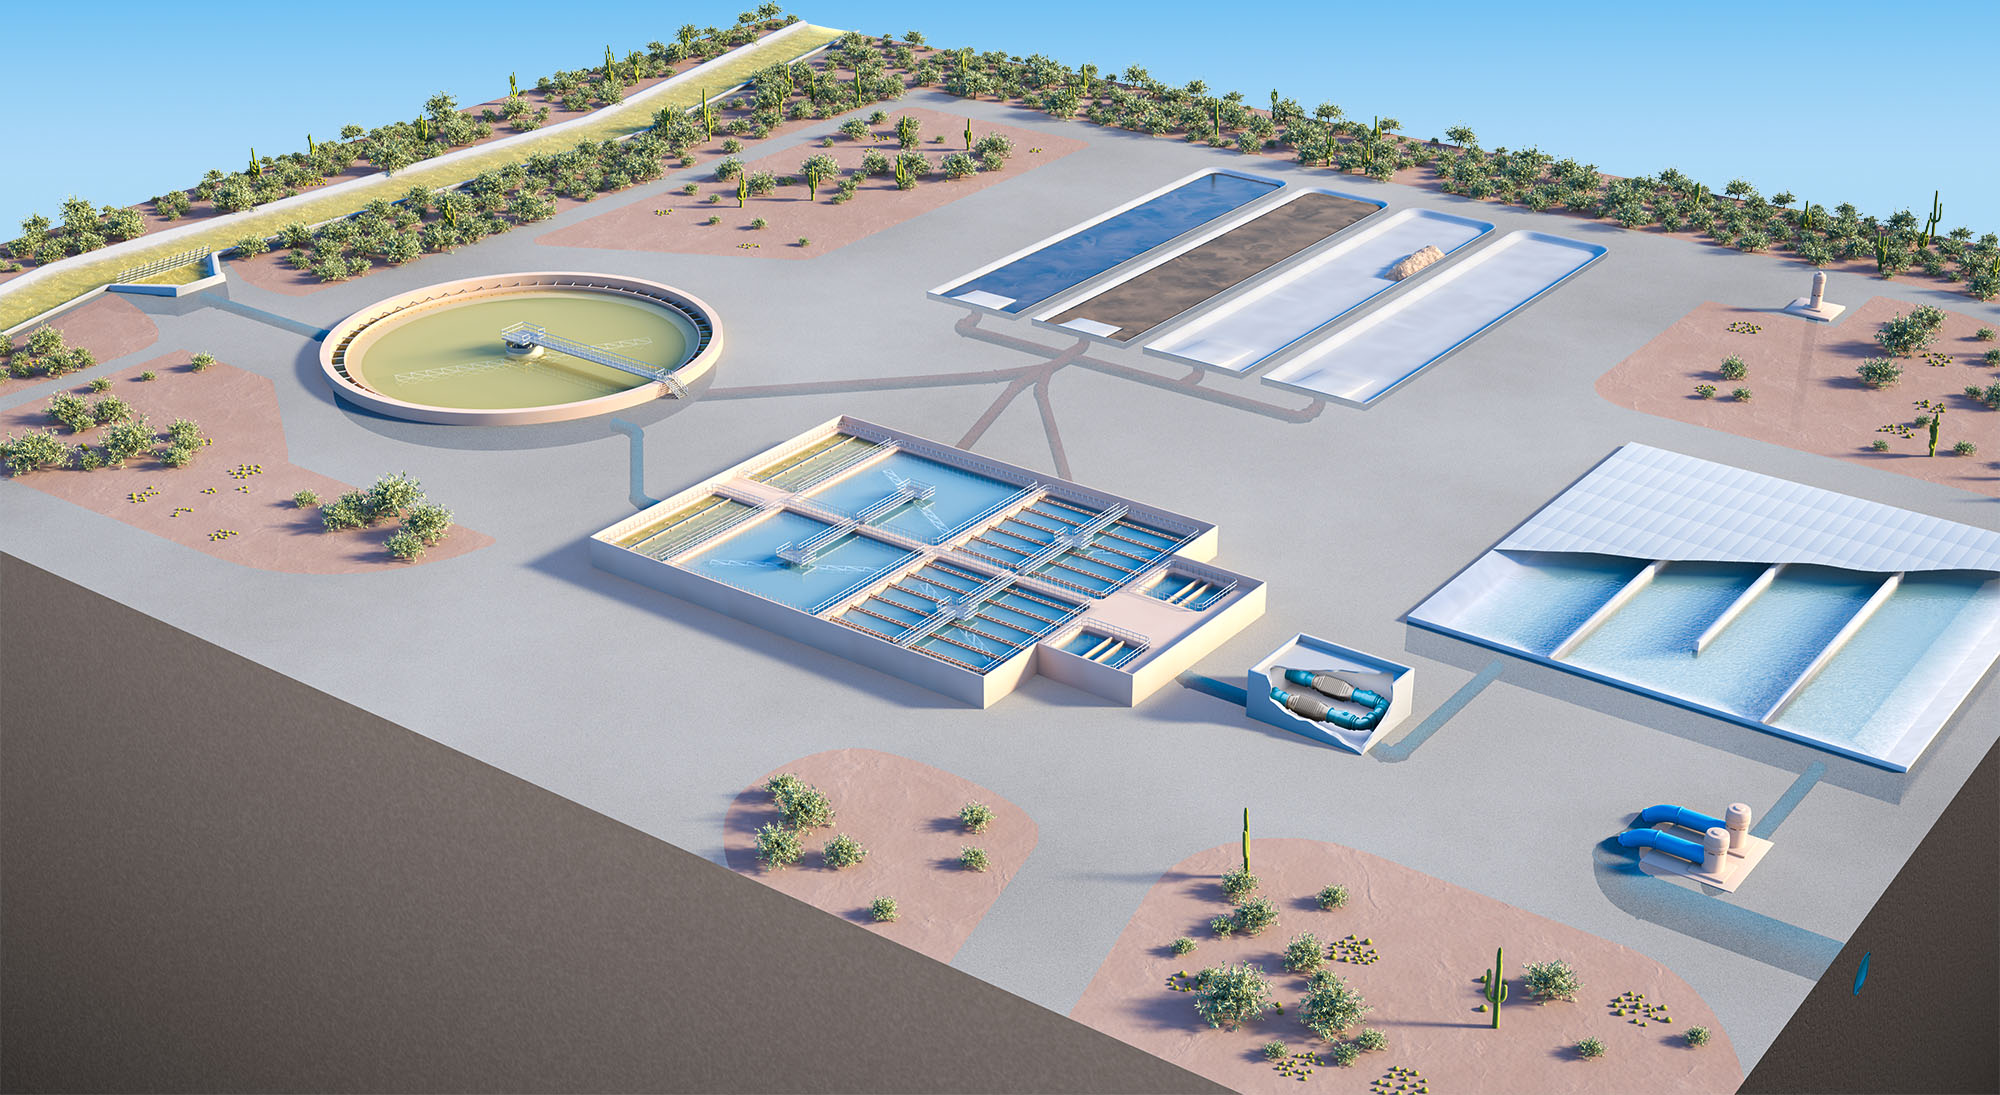 A slice of flat terrain depicts the layout of a typical water treatment plant (3D render).